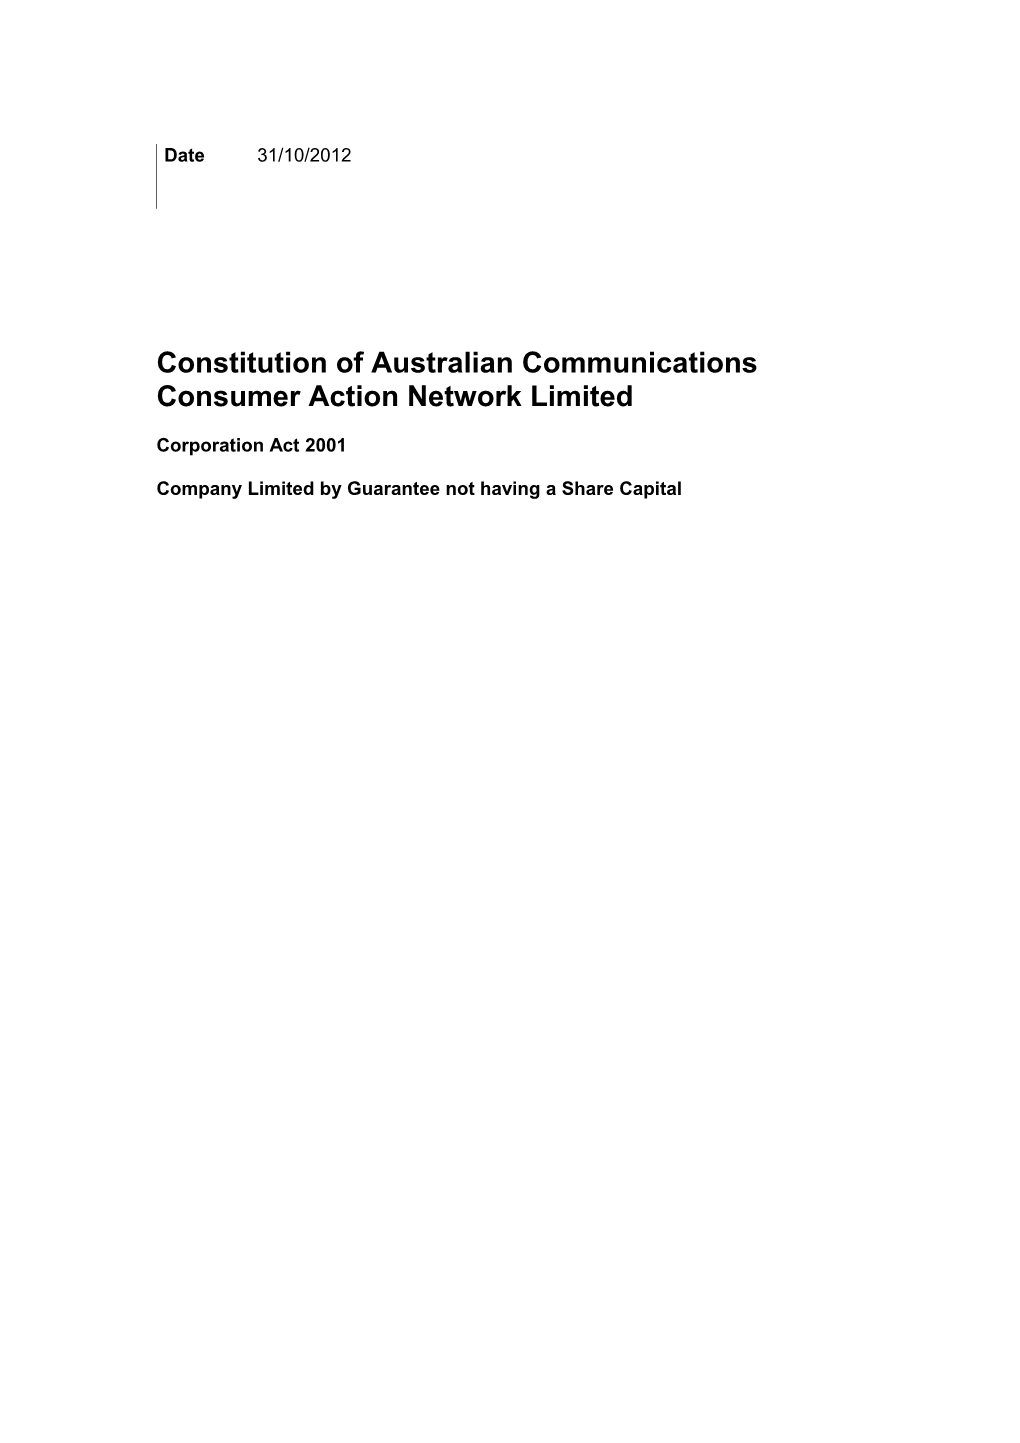 Constitution of Australian Communications Consumer Action Network Limited